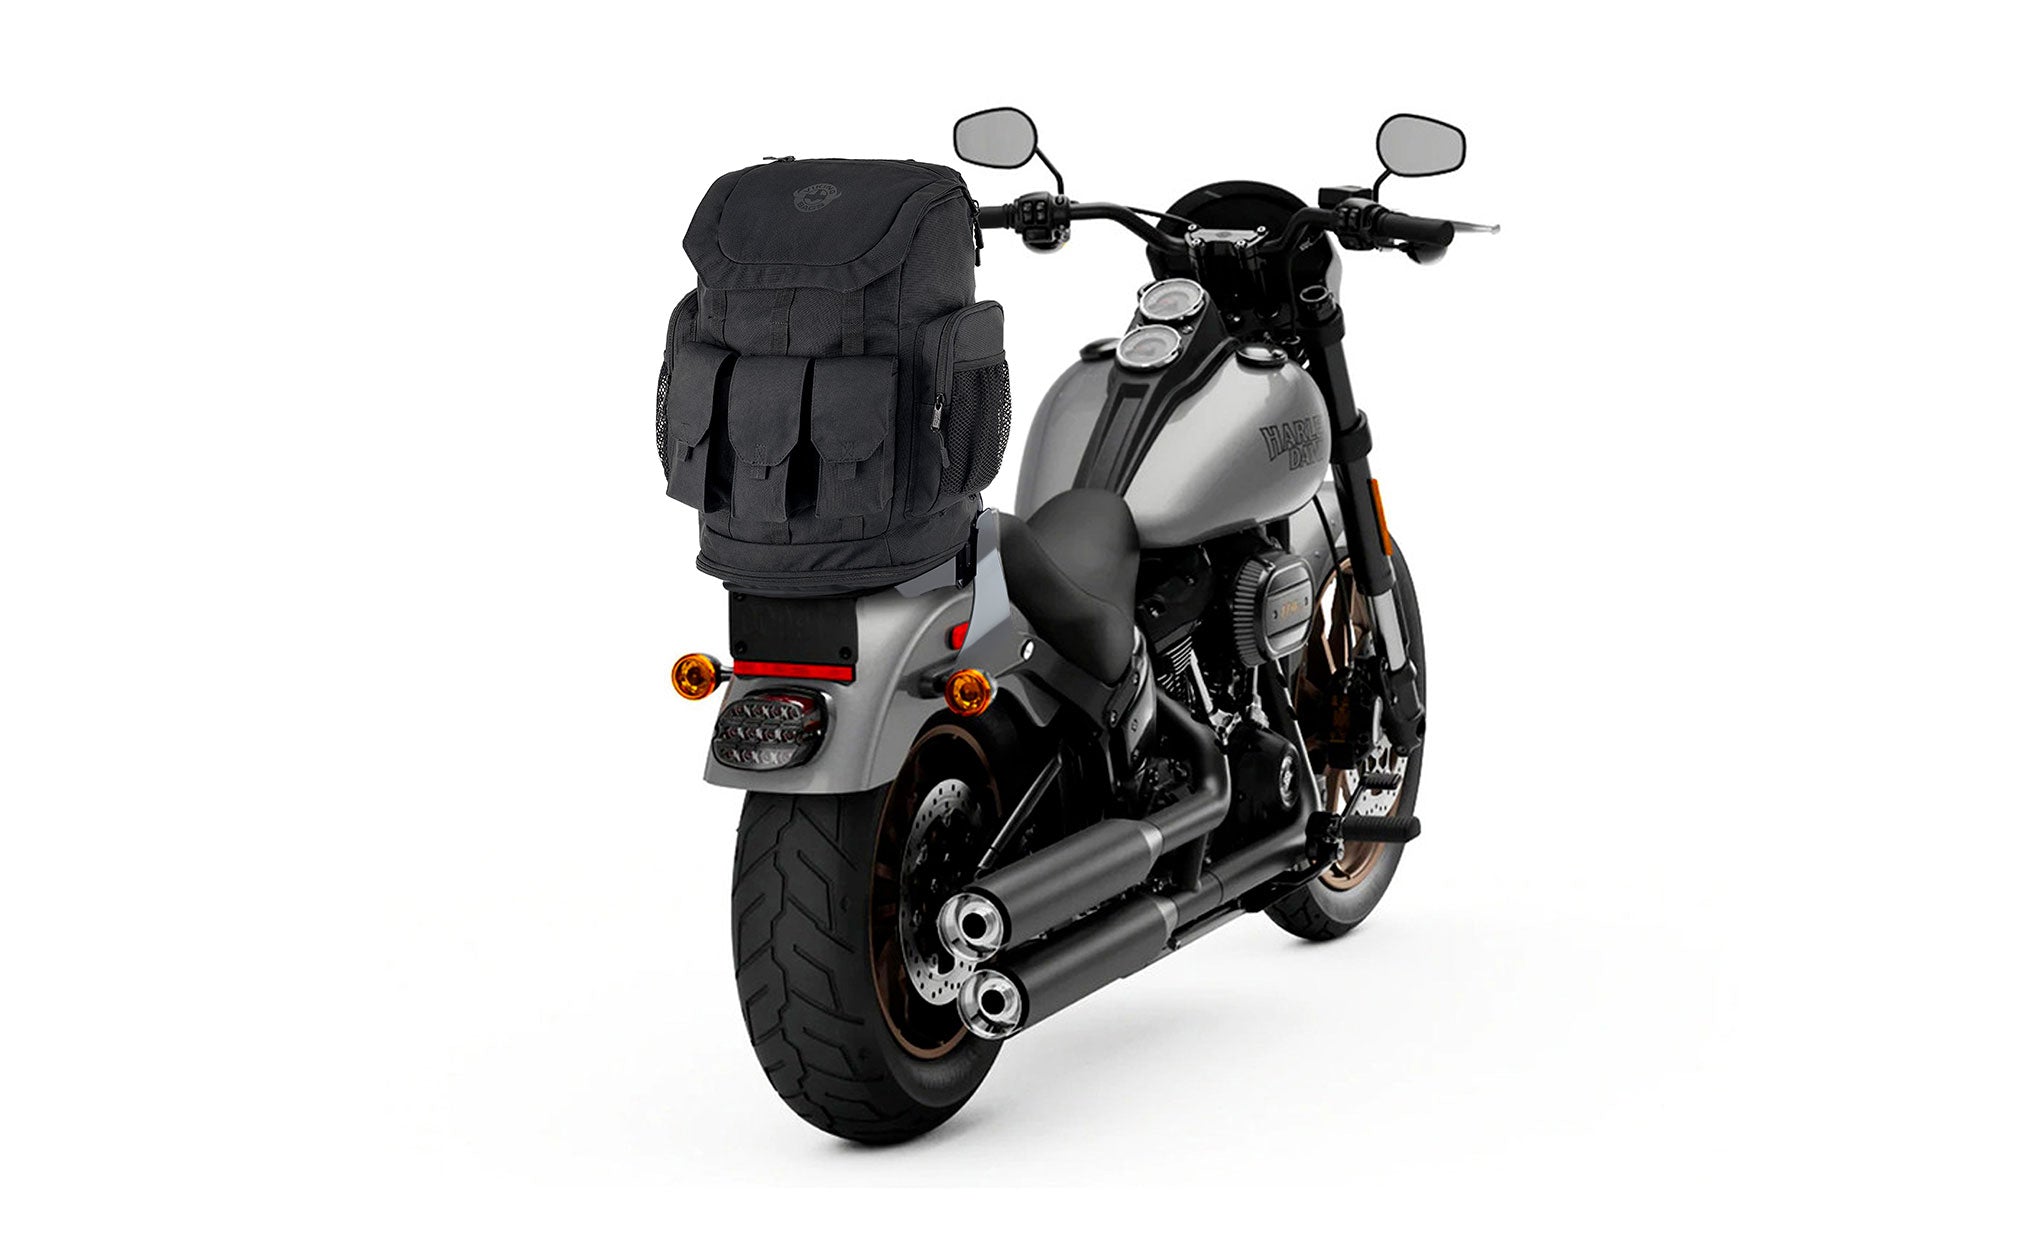 Viking Trident XL Motorcycle Backpack for Harley Davidson Bag on Bike View @expand